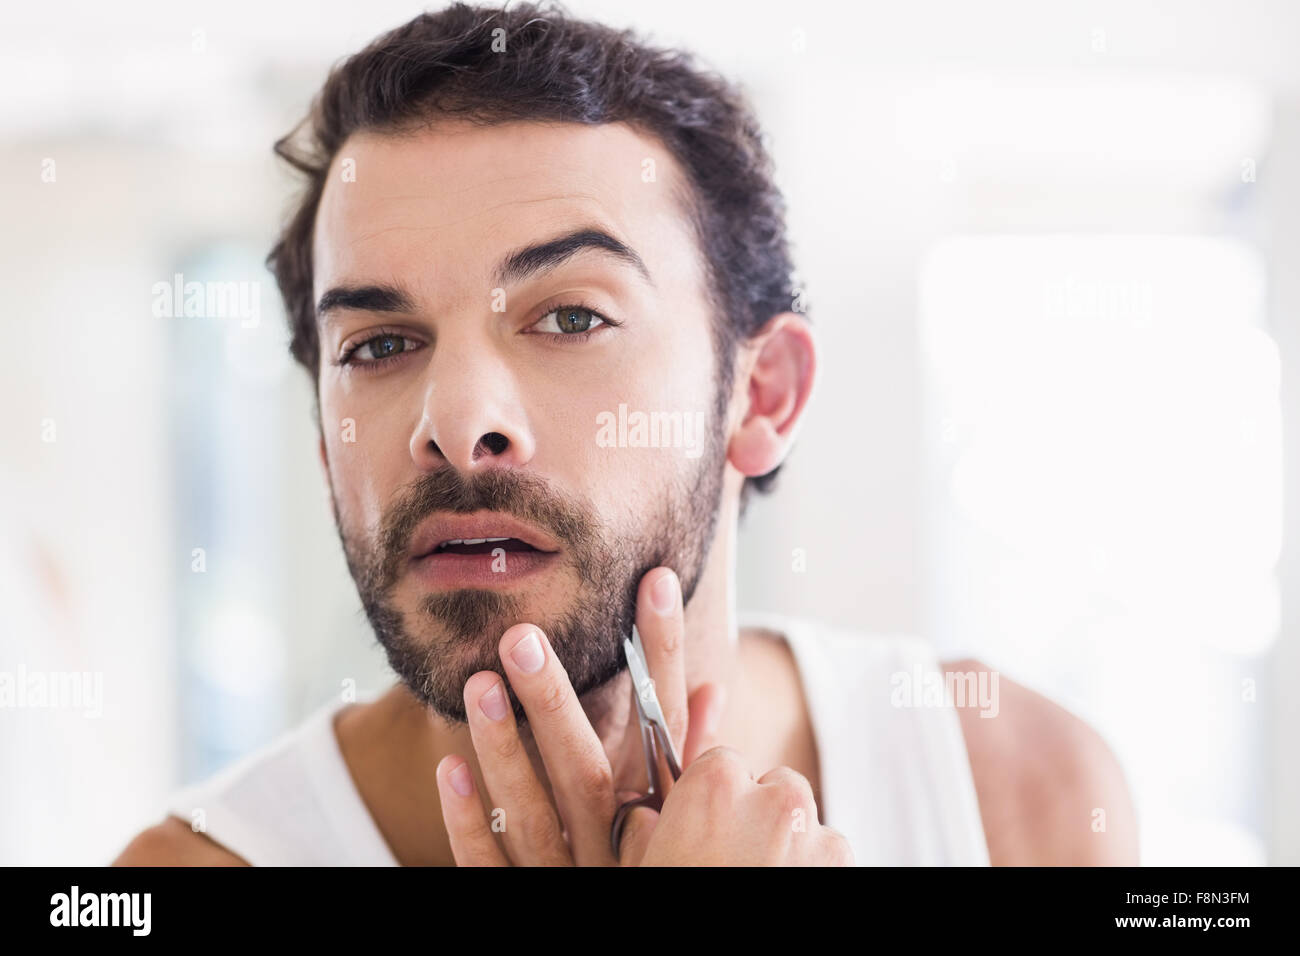 Concentrated man cutting his beard with scissors Stock Photo